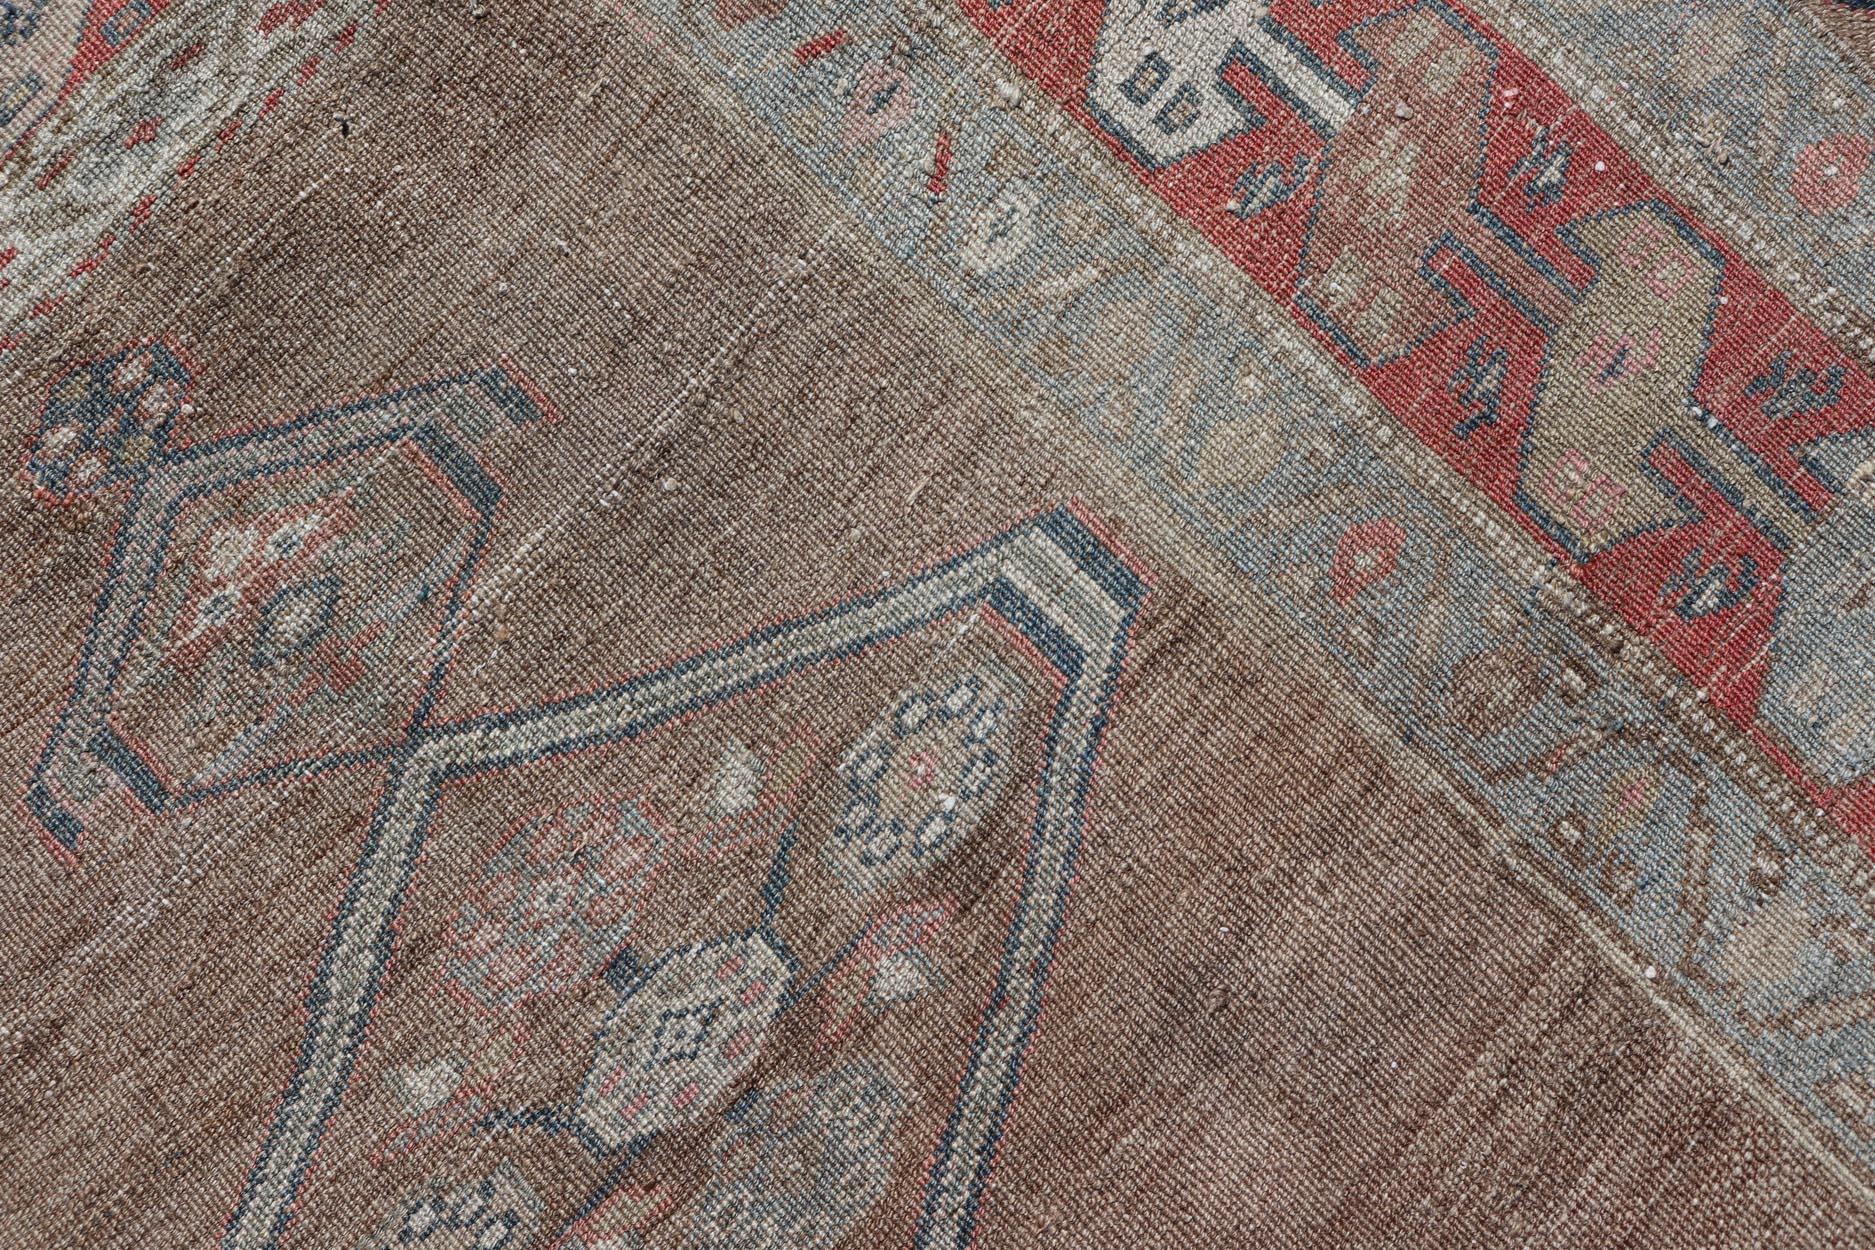 Wool Antique Sarab Runner with Sub-Geometric Medallion Design in Red, Blue & Brown For Sale